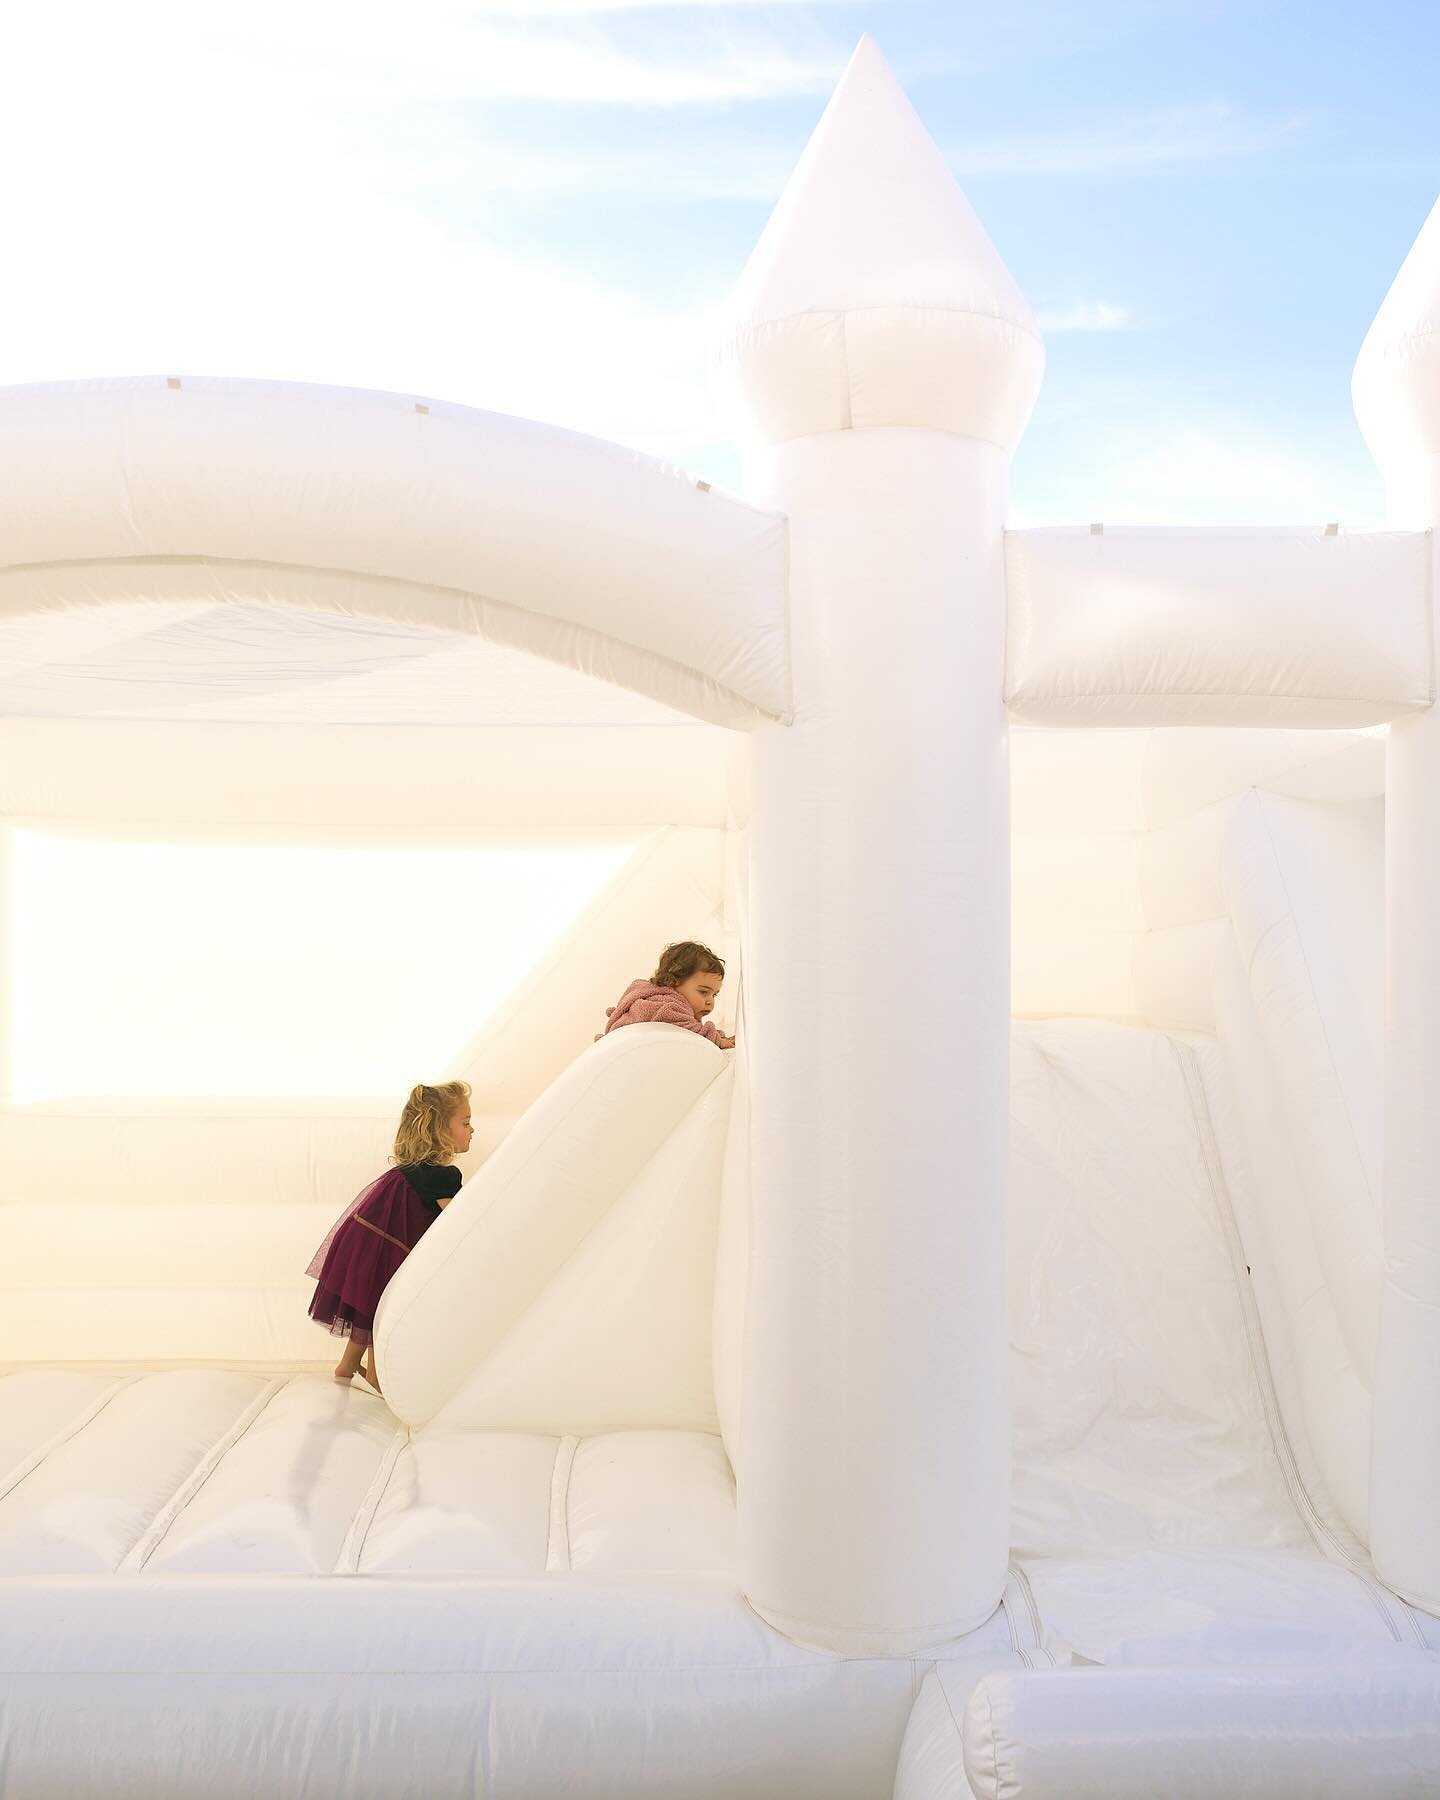 ✨ 3 reasons why you should book with Elevate Evans: ✨

1. We have 6 aesthetic bounce houses for you to choose from (let&rsquo;s say goodbye to those smelly bright ones)

2. The adults get to sit back &amp; relax while the kids bounce the day away 👋?